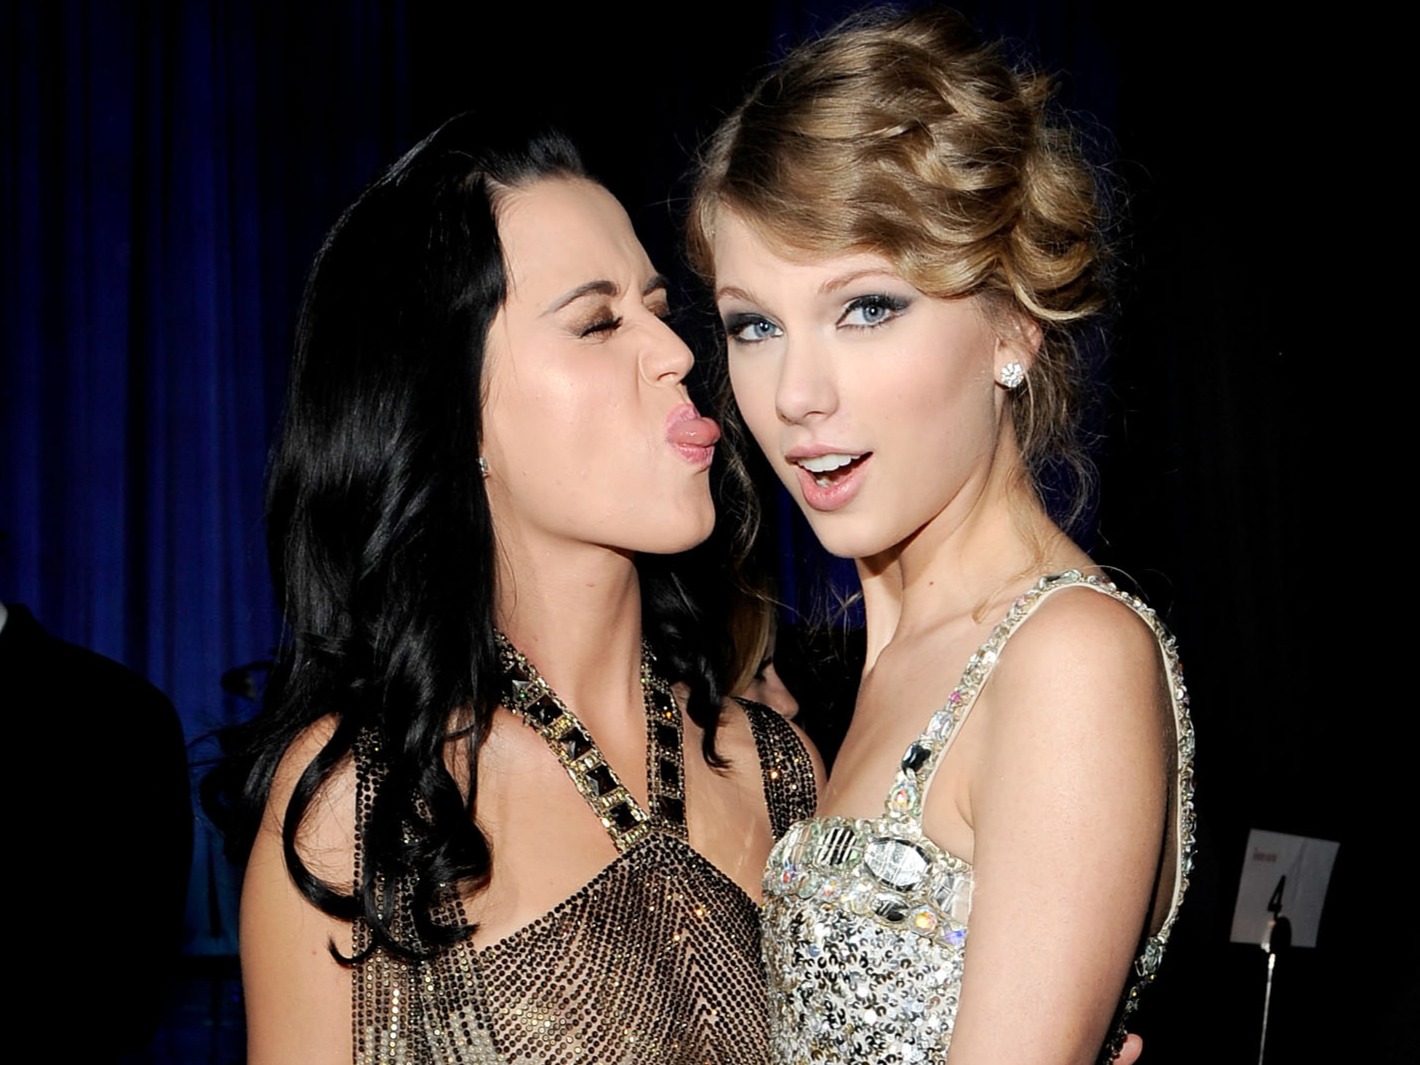 heres how katy perry and taylor swift went from friends to sworn enemies